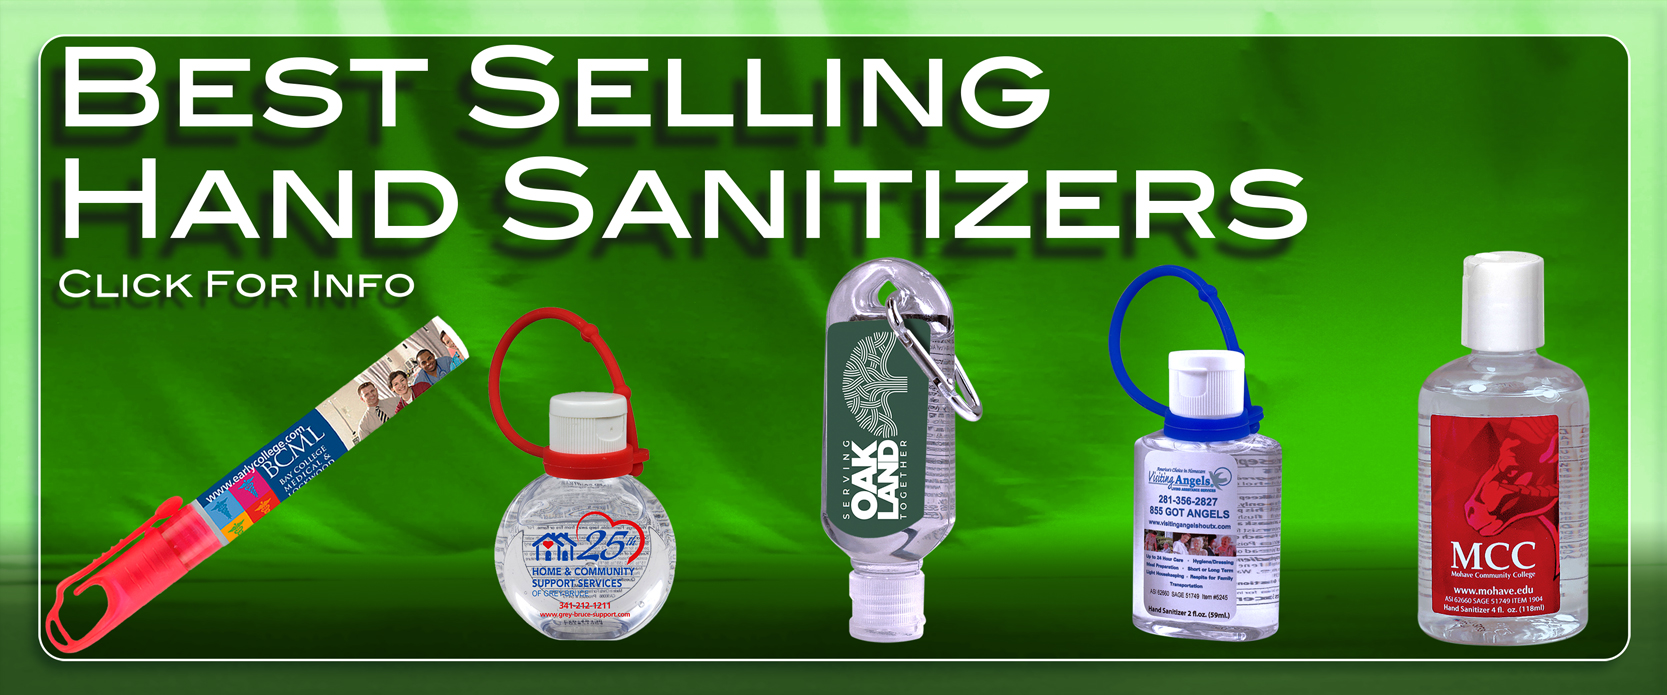 Best Selling Sanitizers and Masks